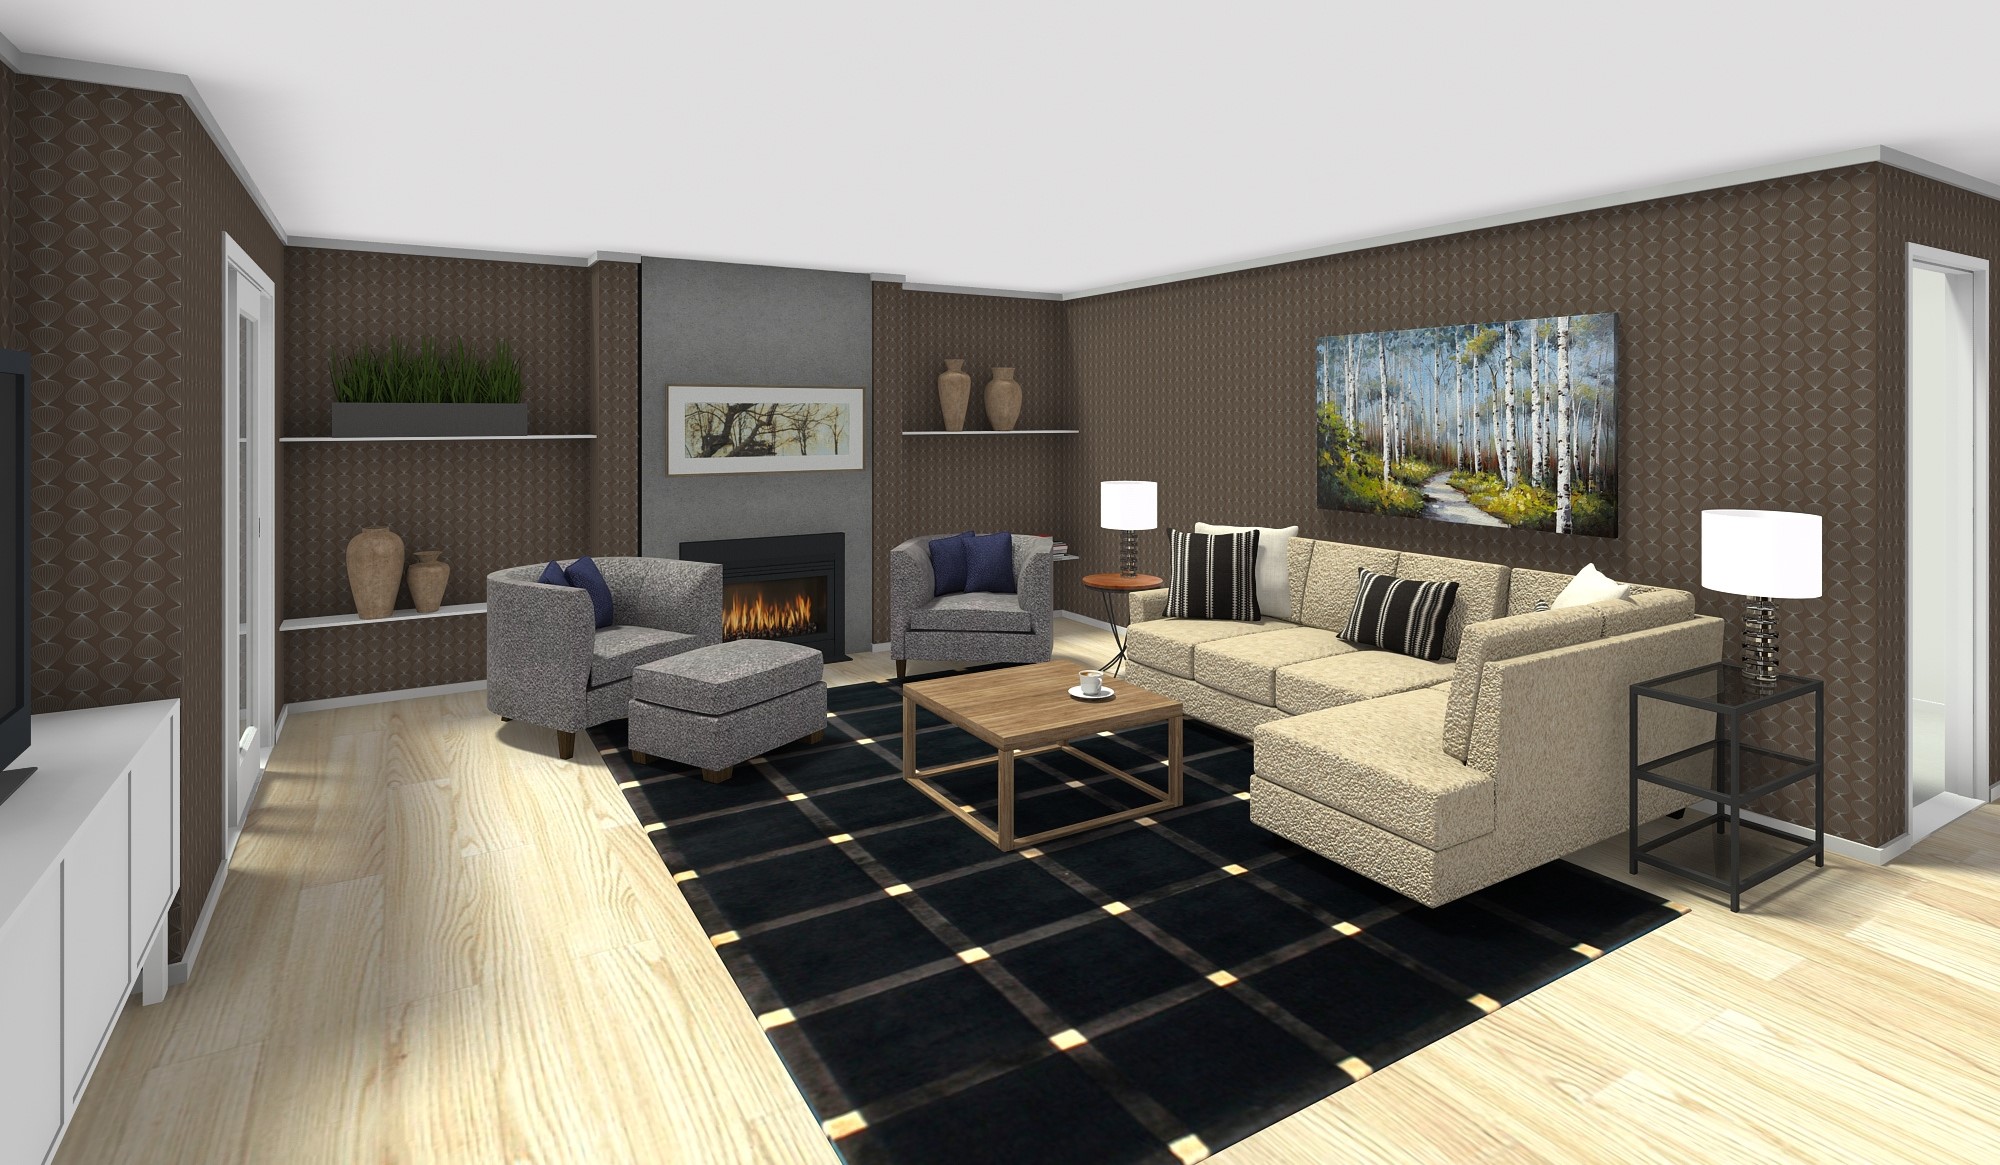 Furniture Plan for basement. Layout decor and design for a Sherwood park home